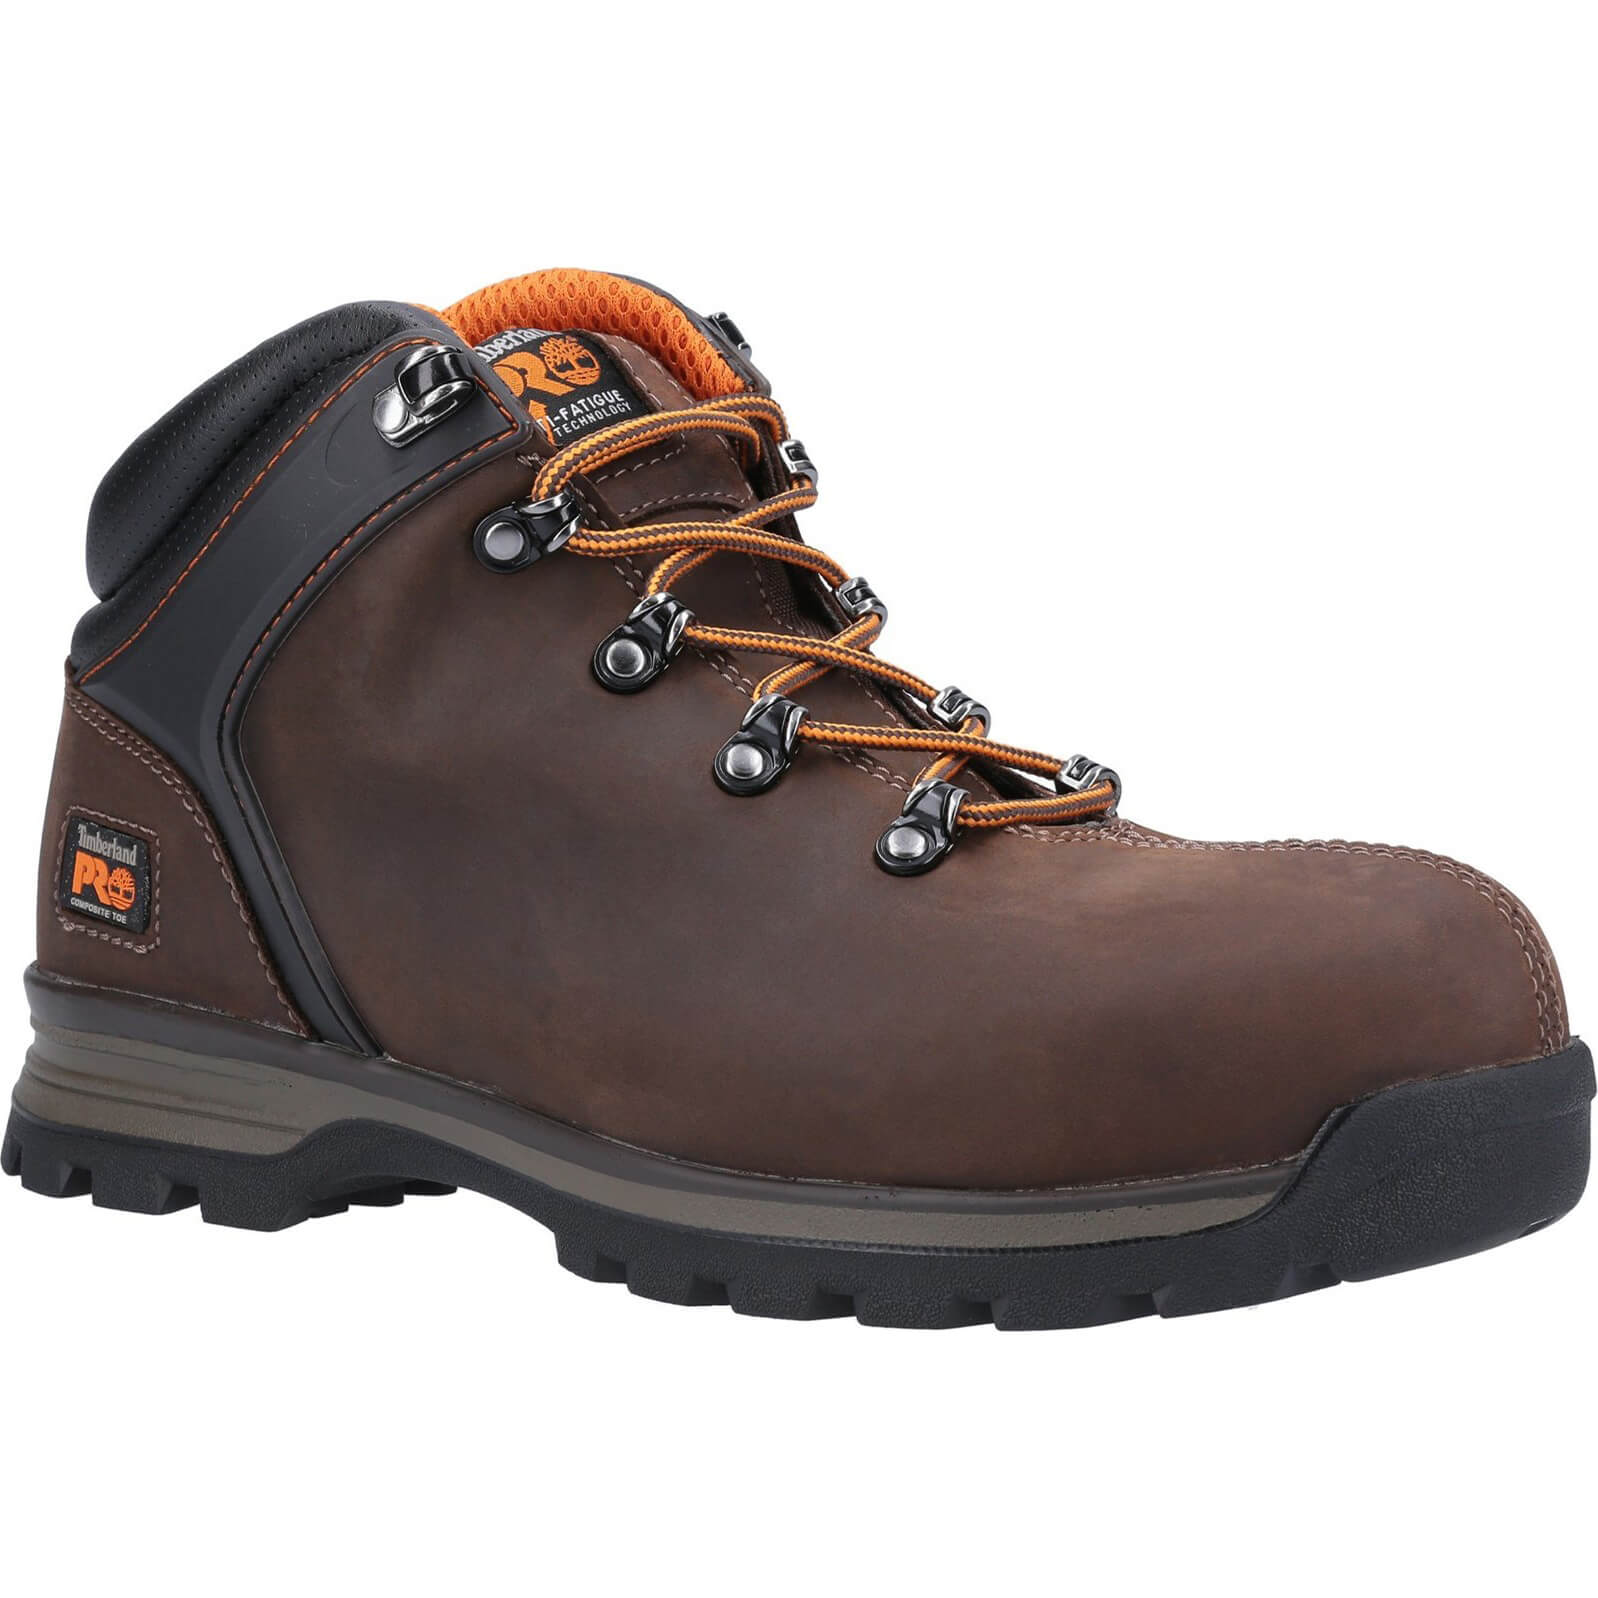 Image of Timberland Pro Splitrock XT Composite Safety Toe Work Boot Brown Size 14